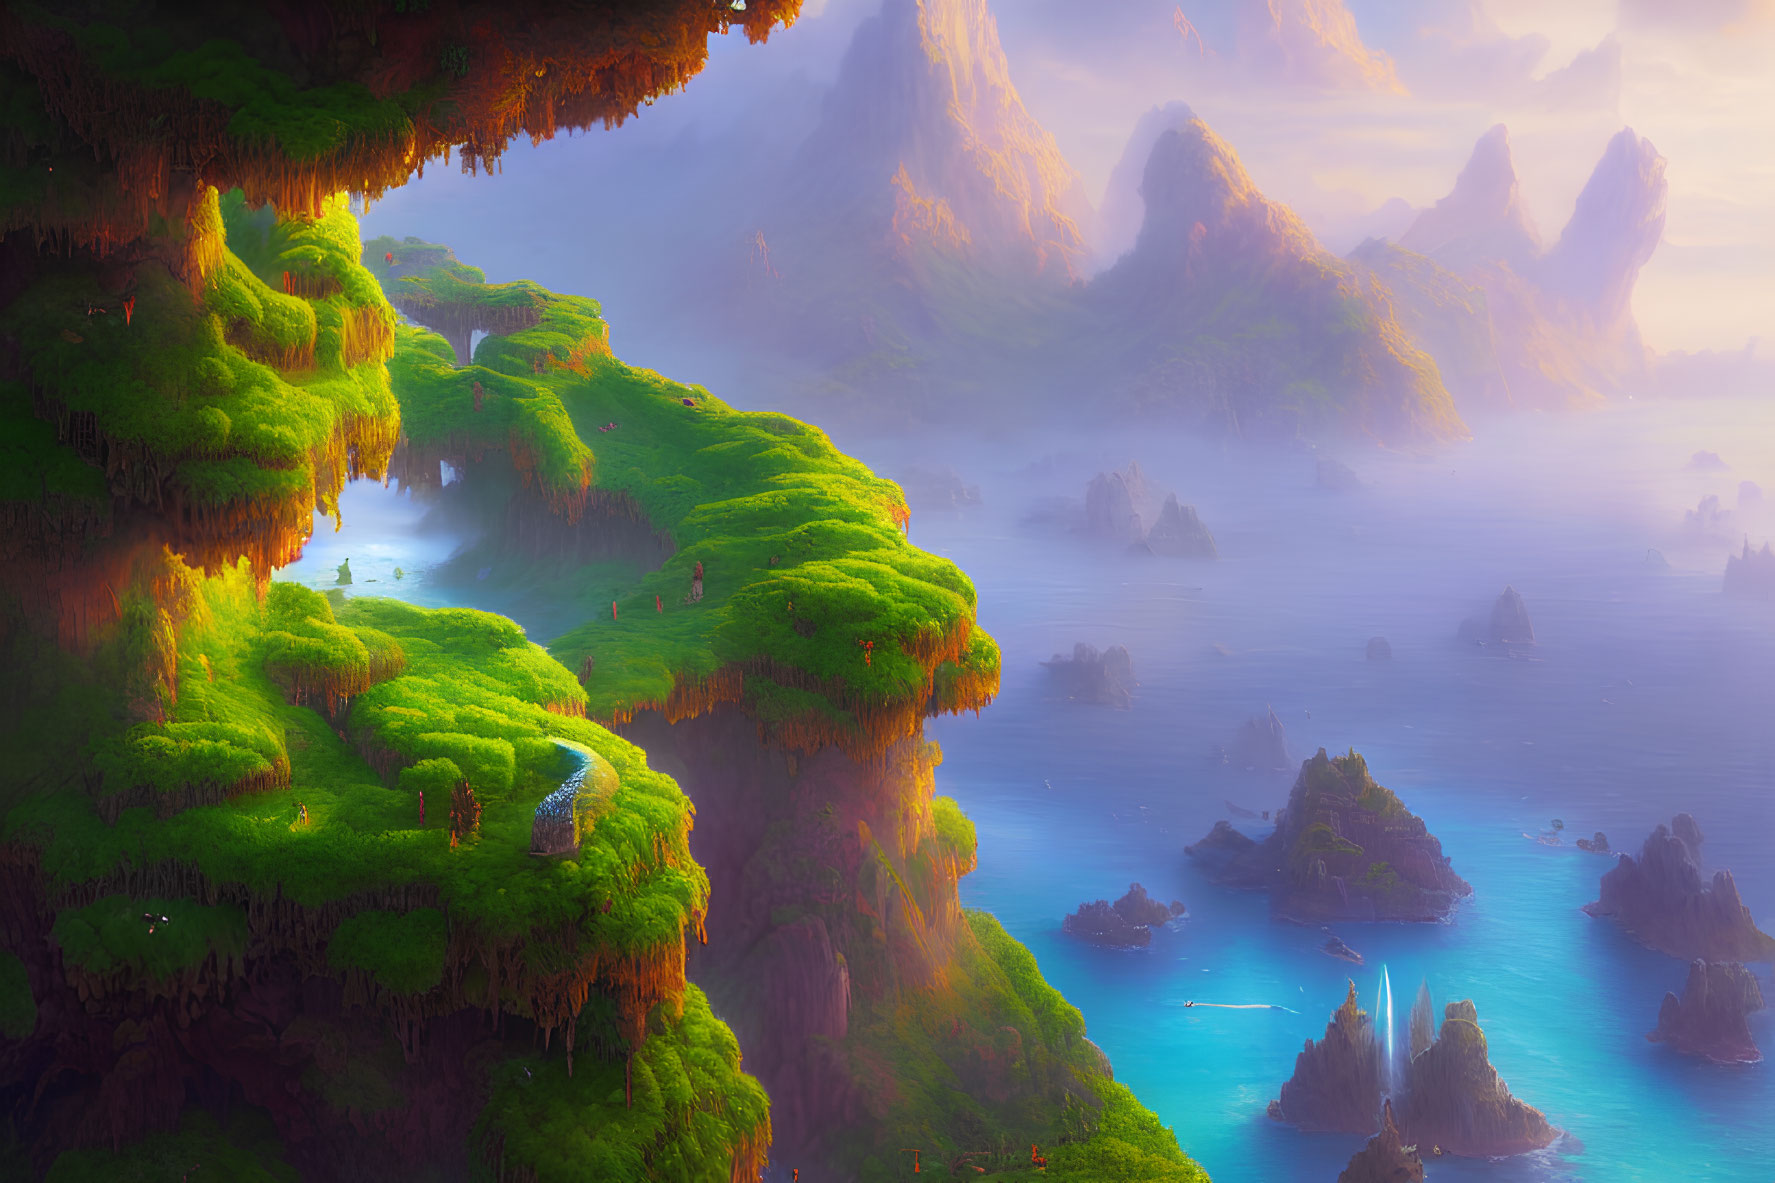 Fantastical landscape with lush green floating islands above mist-covered sea